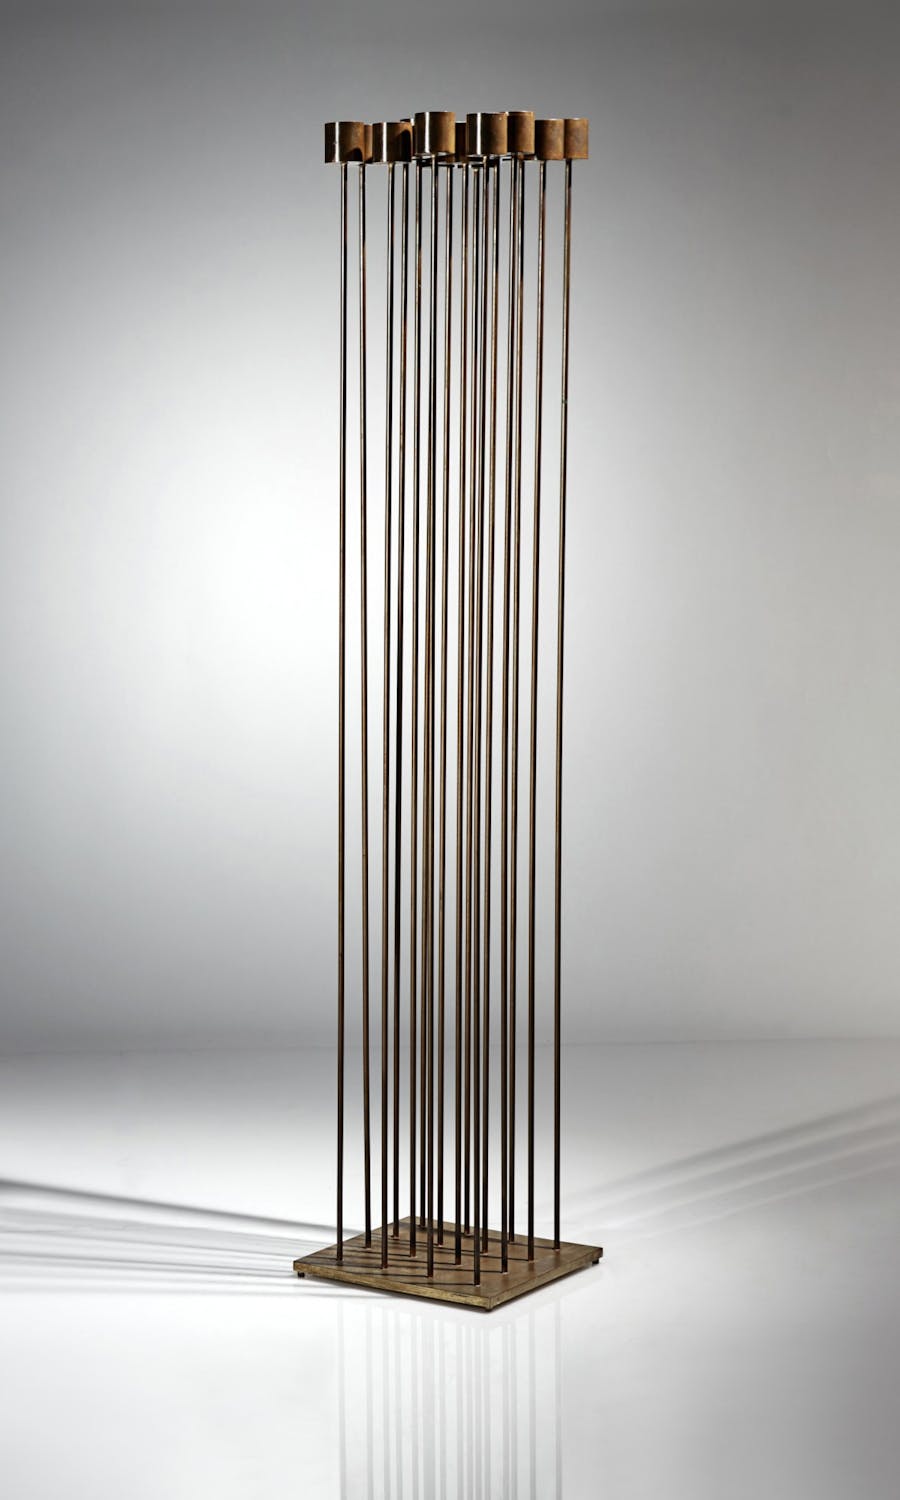 Harry Bertoia, Untitled (Sonambient), circa 1970s, four rows of four rods (16 rods total) with cylinder tops on applied feet, bronze, beryllium copper and brass. Image © Sotheby's